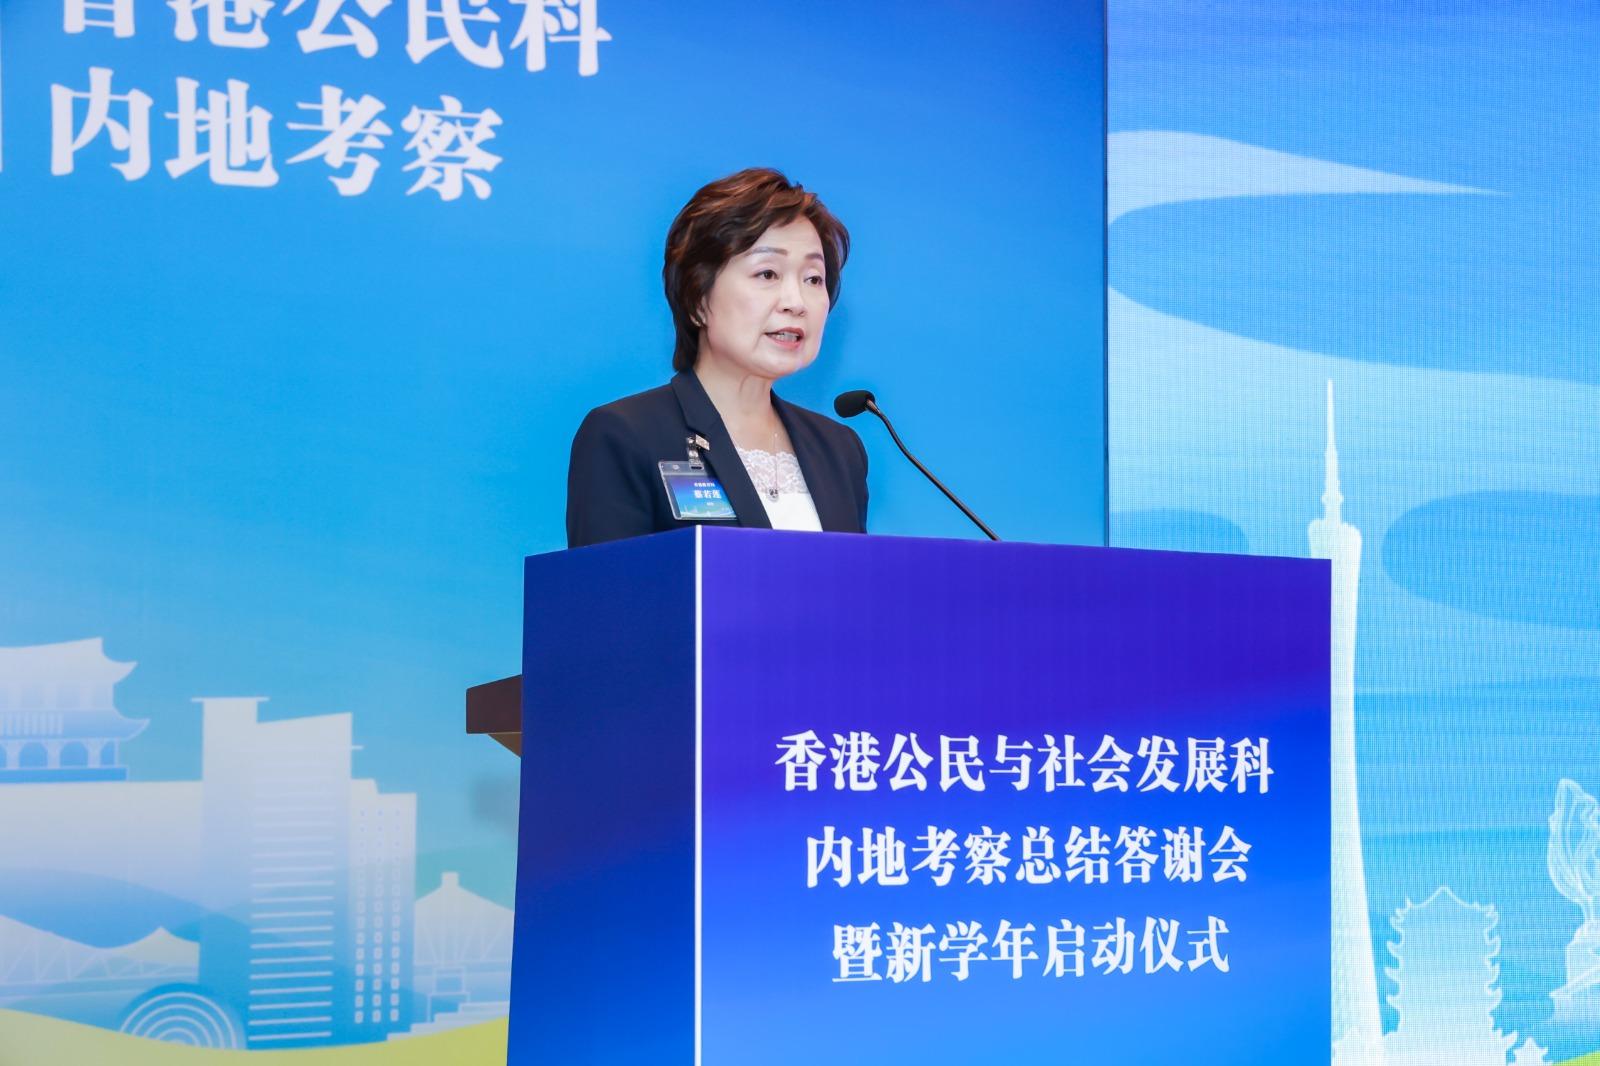 The Secretary for Education, Dr Choi Yuk-lin, speaks at the “Mainland study tour of the senior secondary subject of Citizenship and Social Development thanksgiving session and launch ceremony of the new school year”, jointly organised by the Department of Education of Guangdong Province and the Education Bureau in Guangzhou today (August 28).